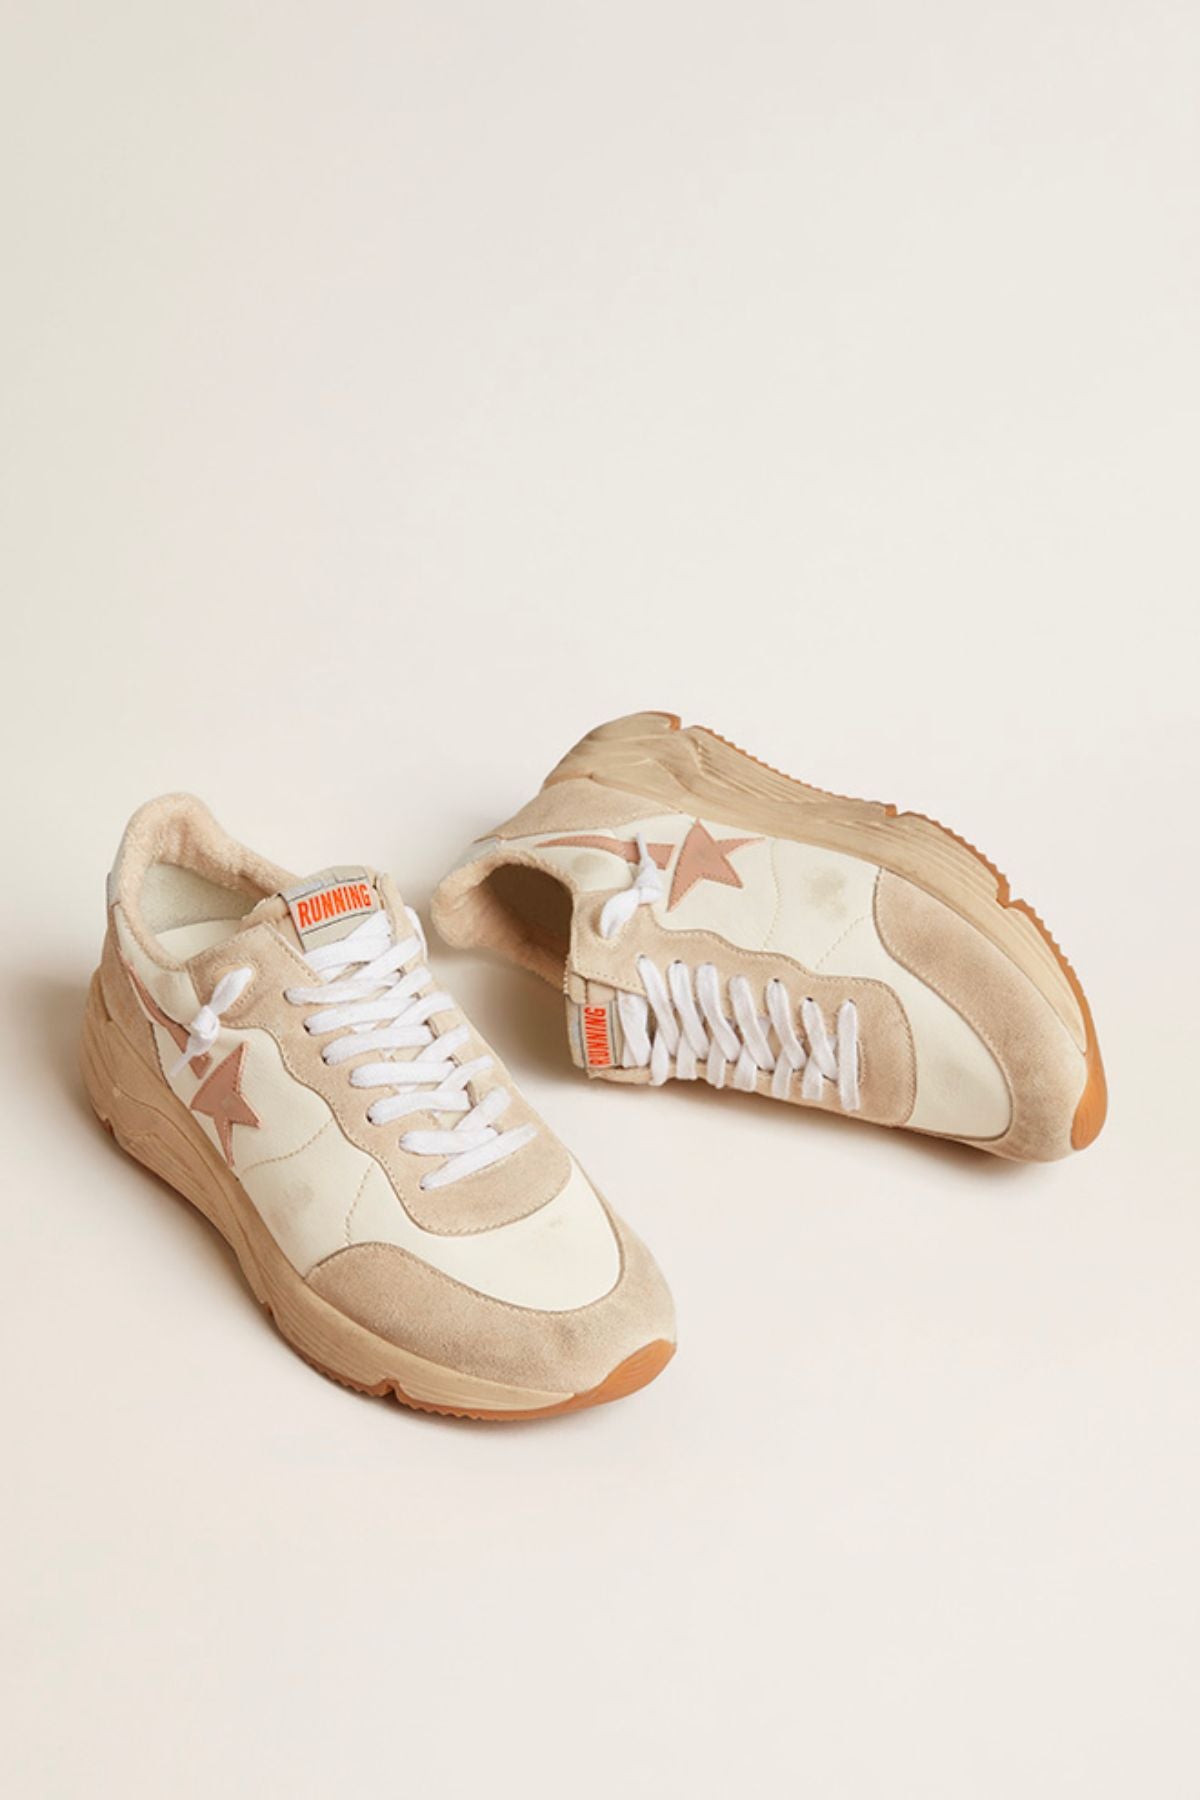 Golden Goose Running Sole Sneaker - White/ Seed Pearl/ Silver